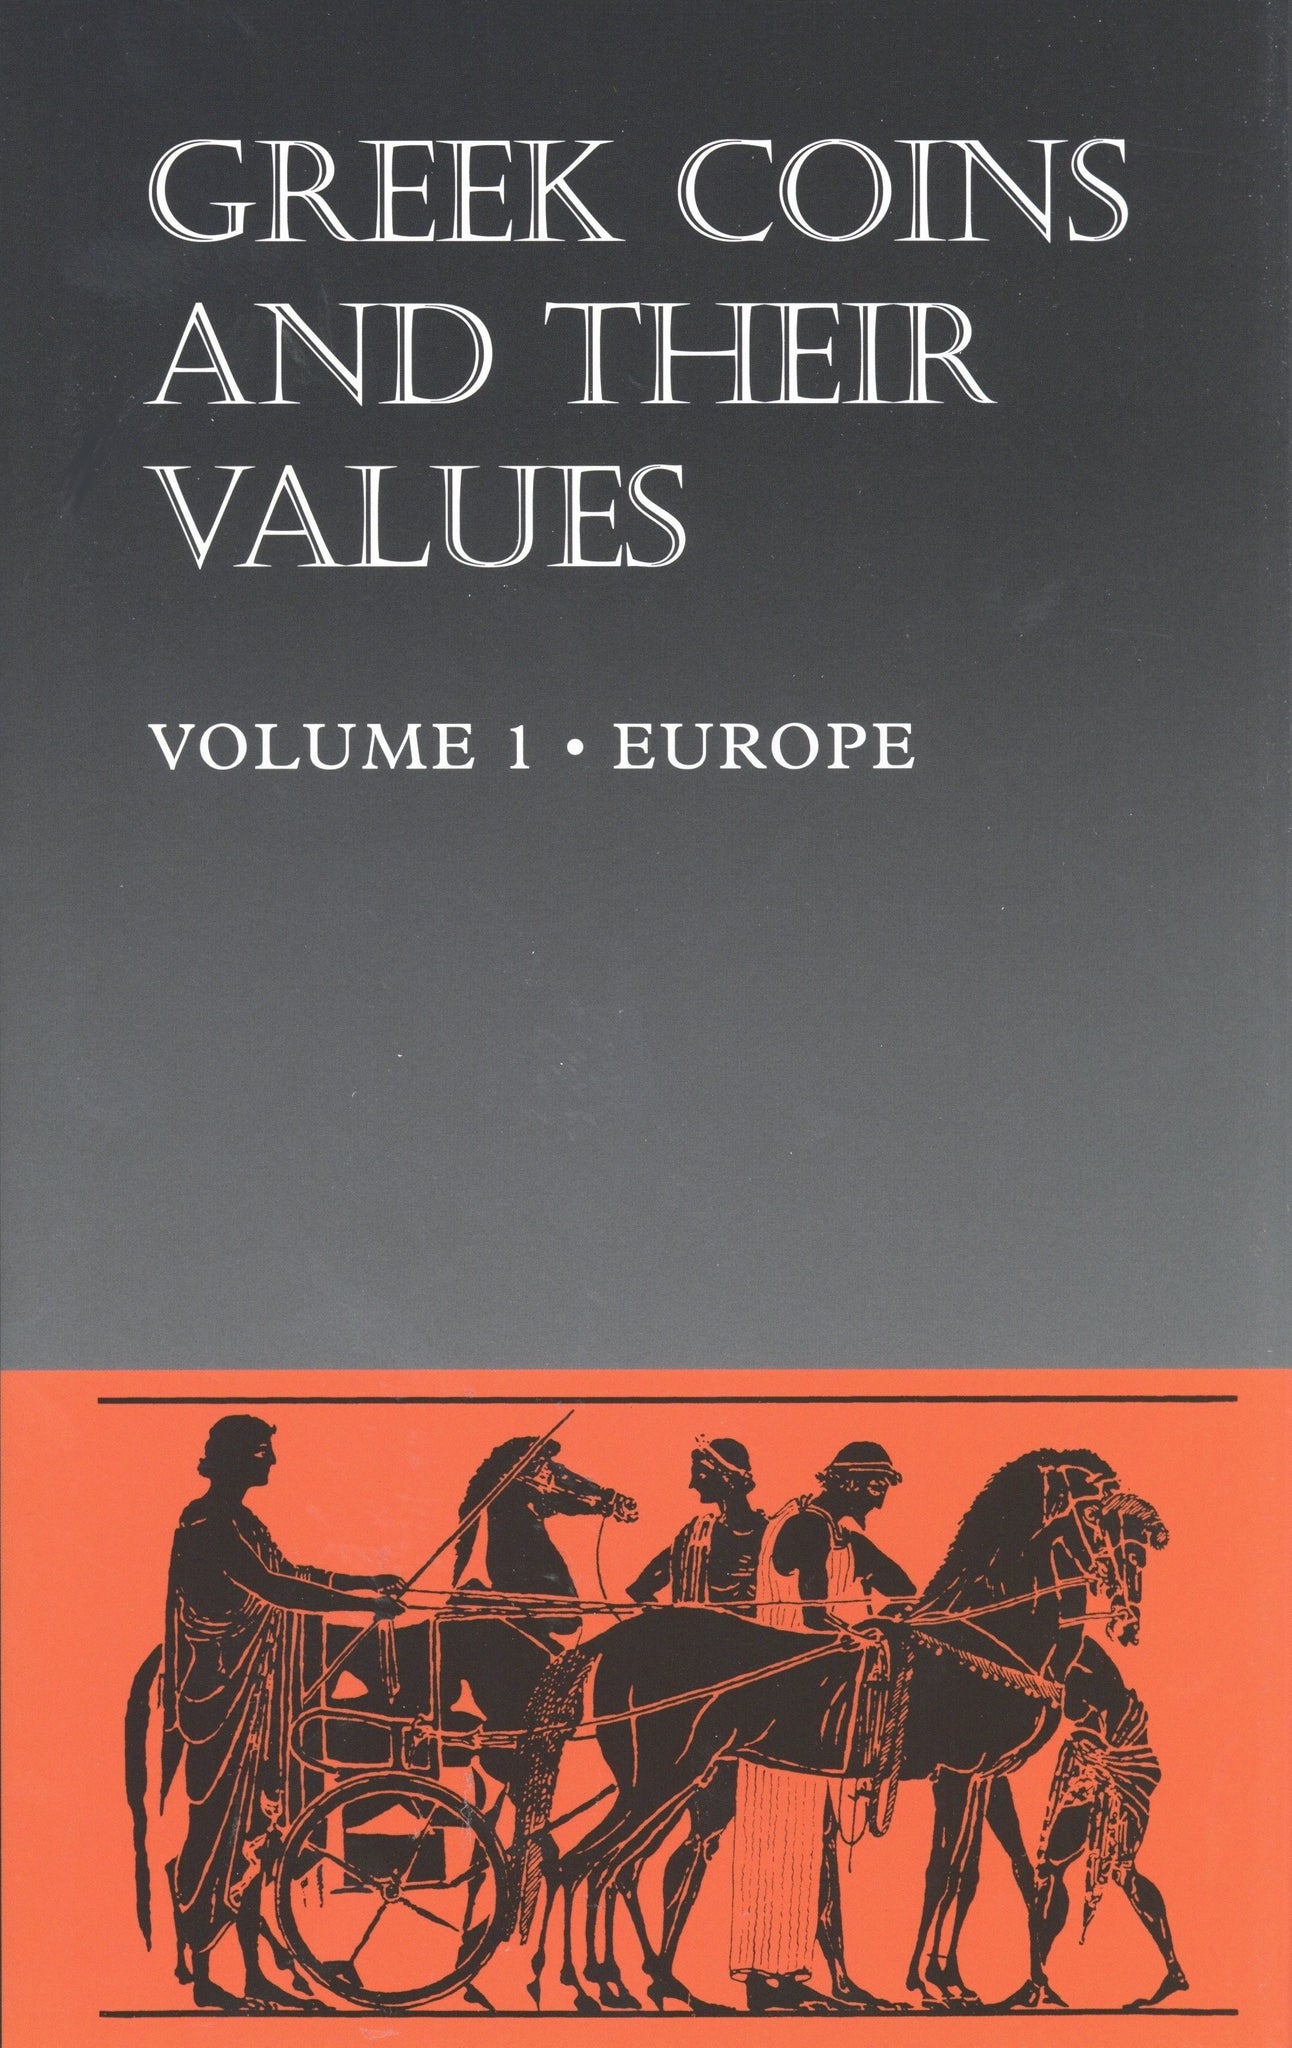 Greek Coins and Their Values Vol I: Europe by Sear, D. R.